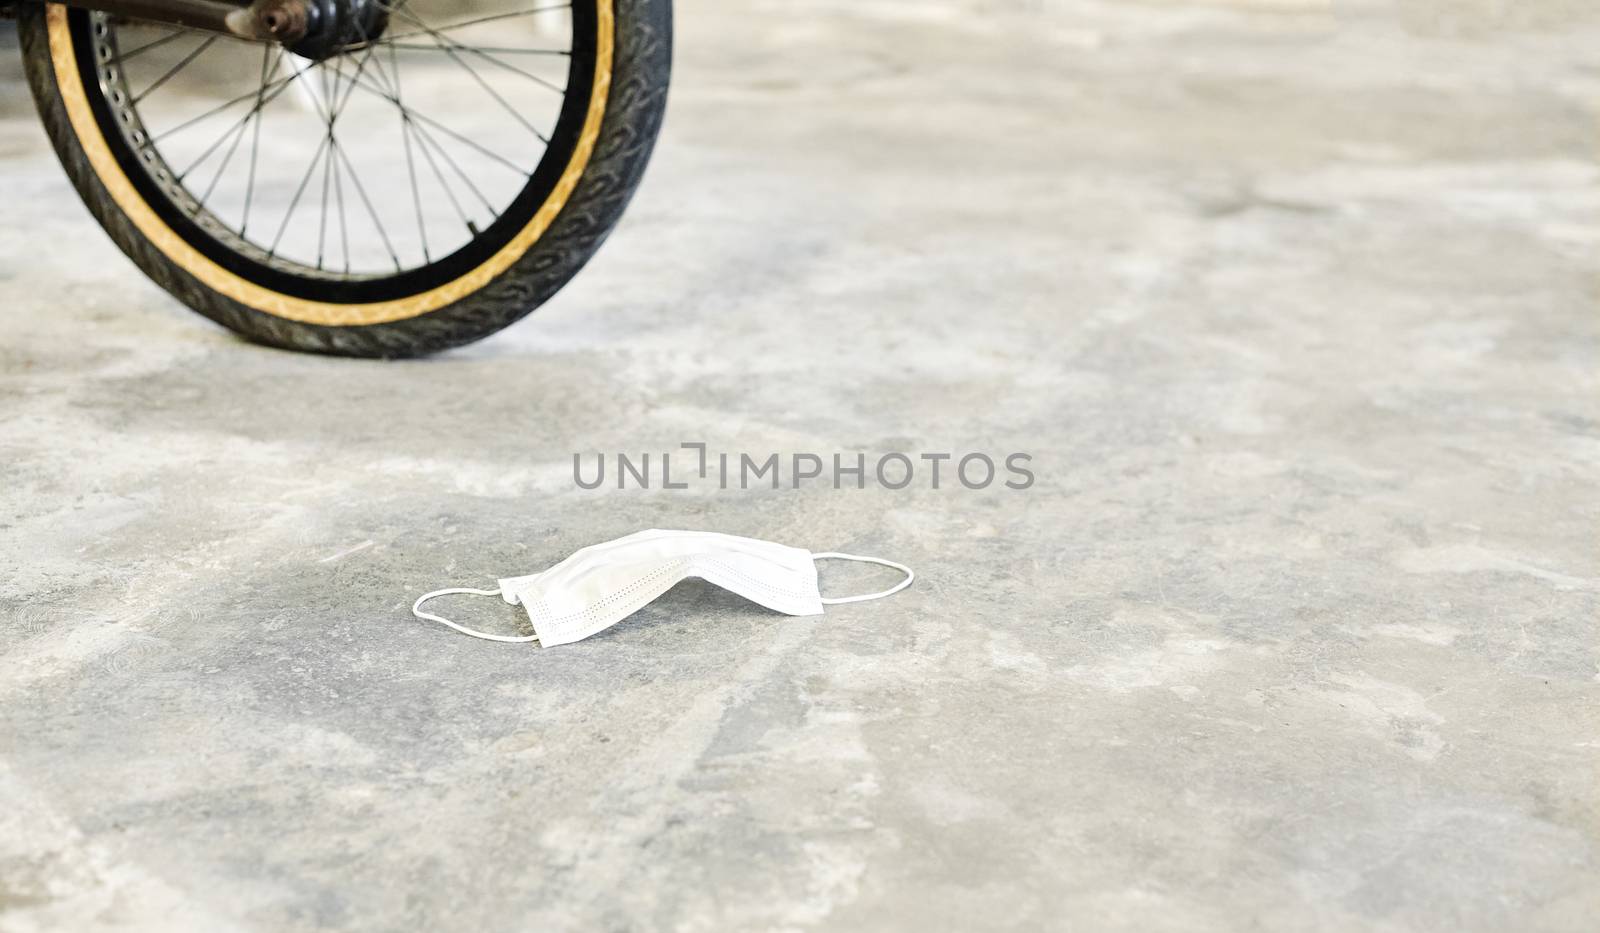 Mask lying on the ground with a bicycle wheel on the bottom by Daniel_Mato